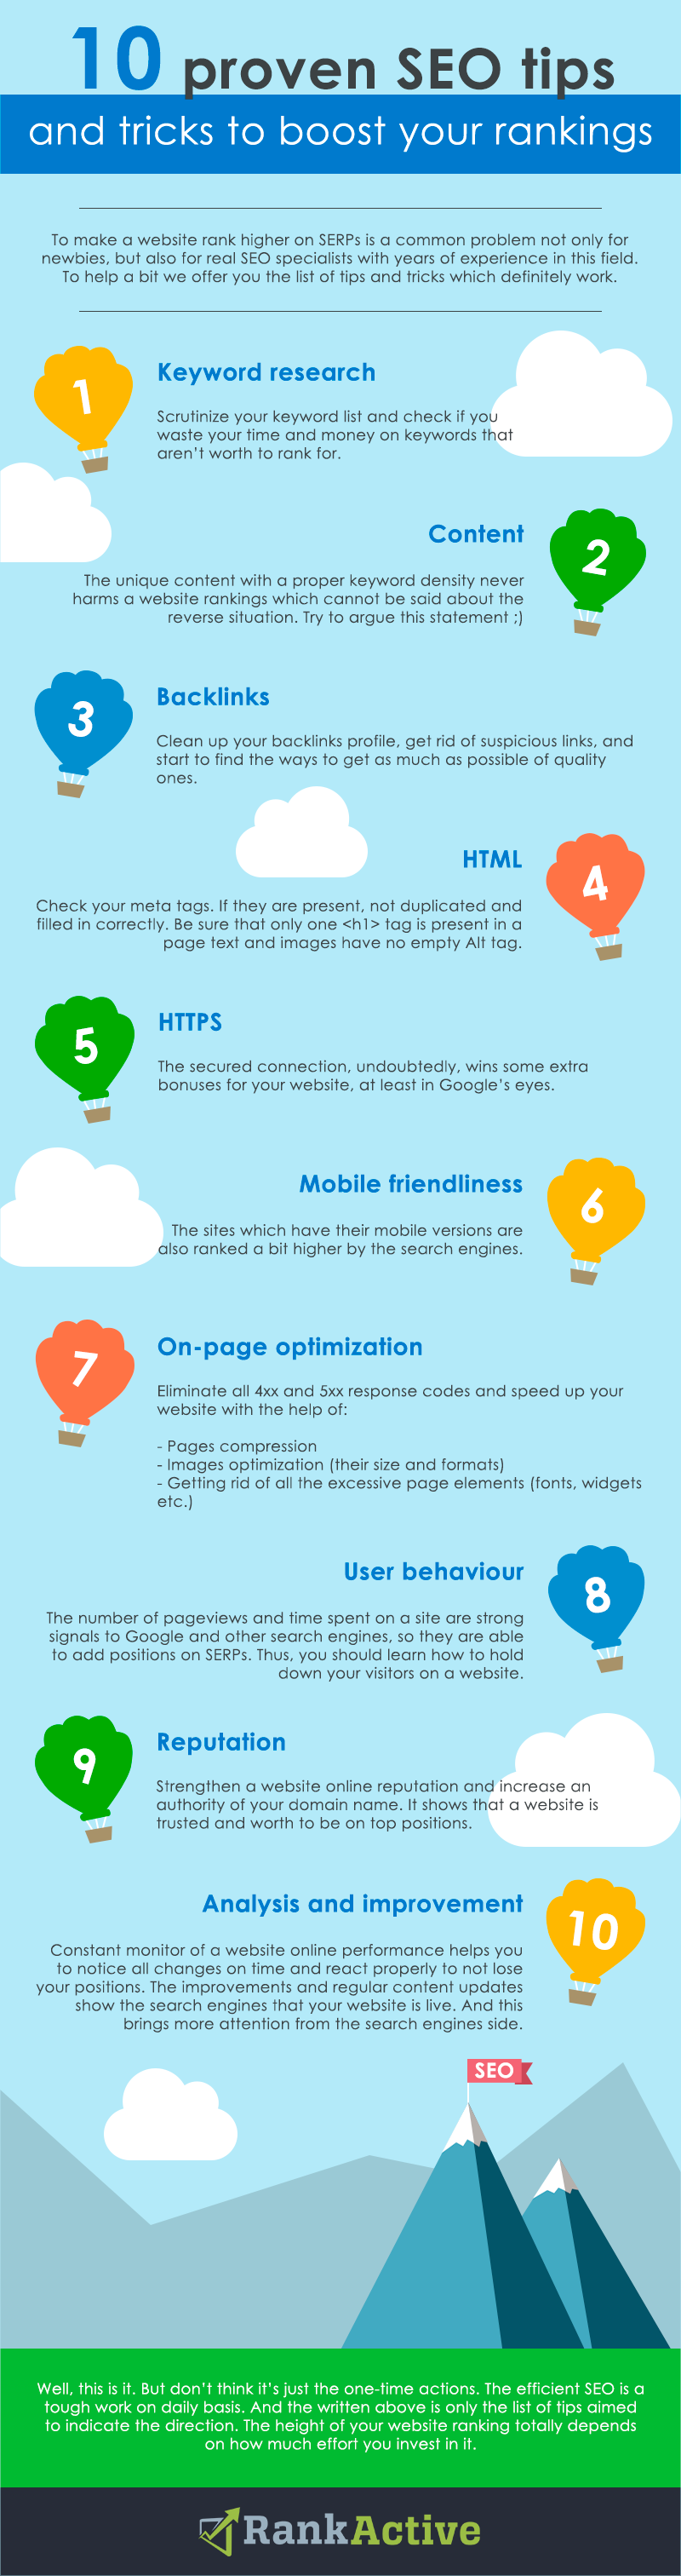 10 proven SEO tips and tricks to boost your rankings